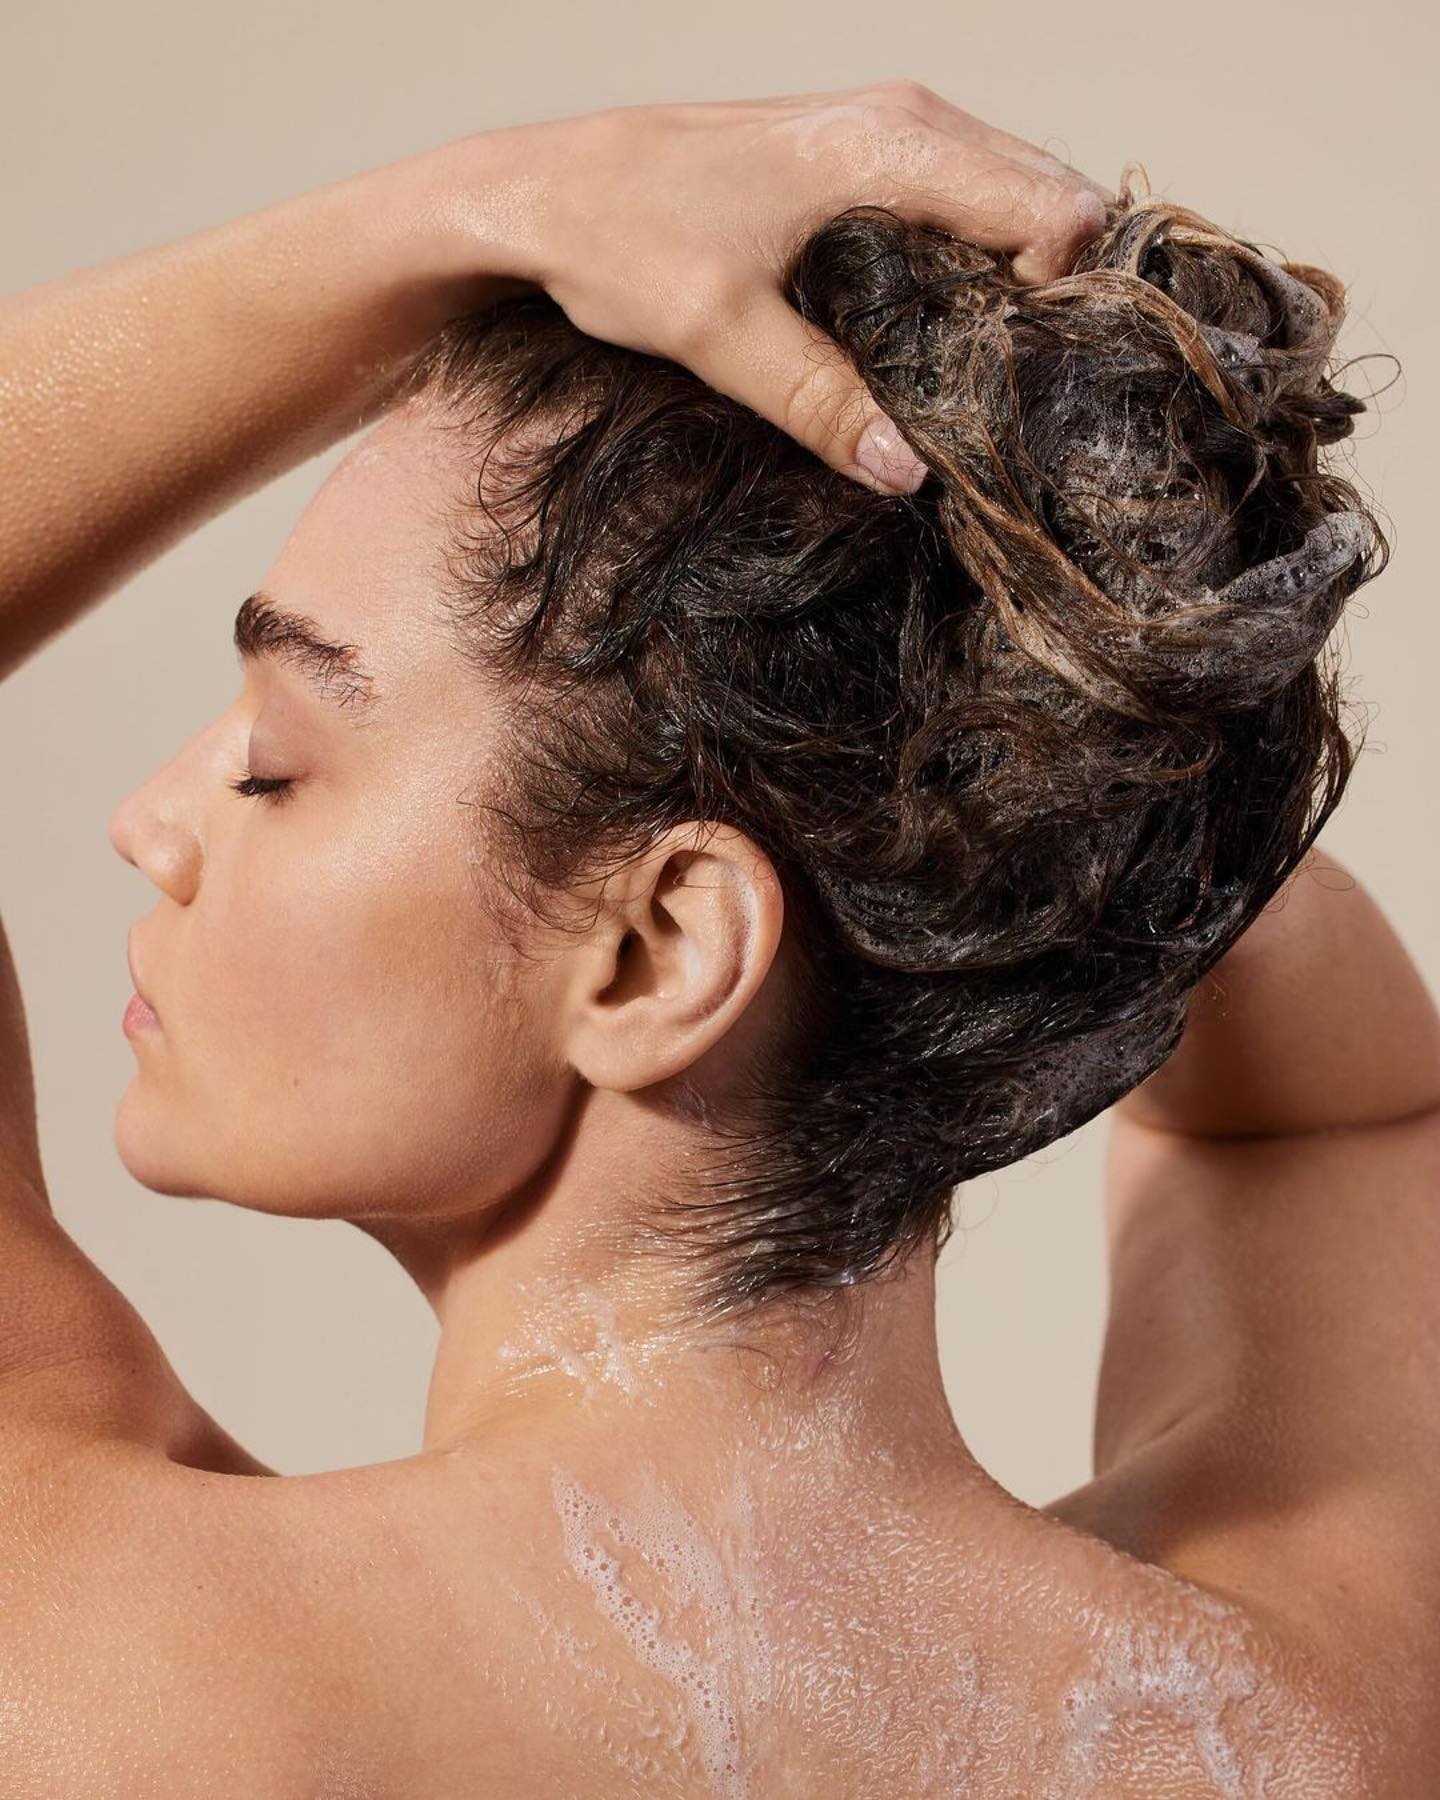 Back shot of woman with dark hair massaging her wet hair and scalp. 